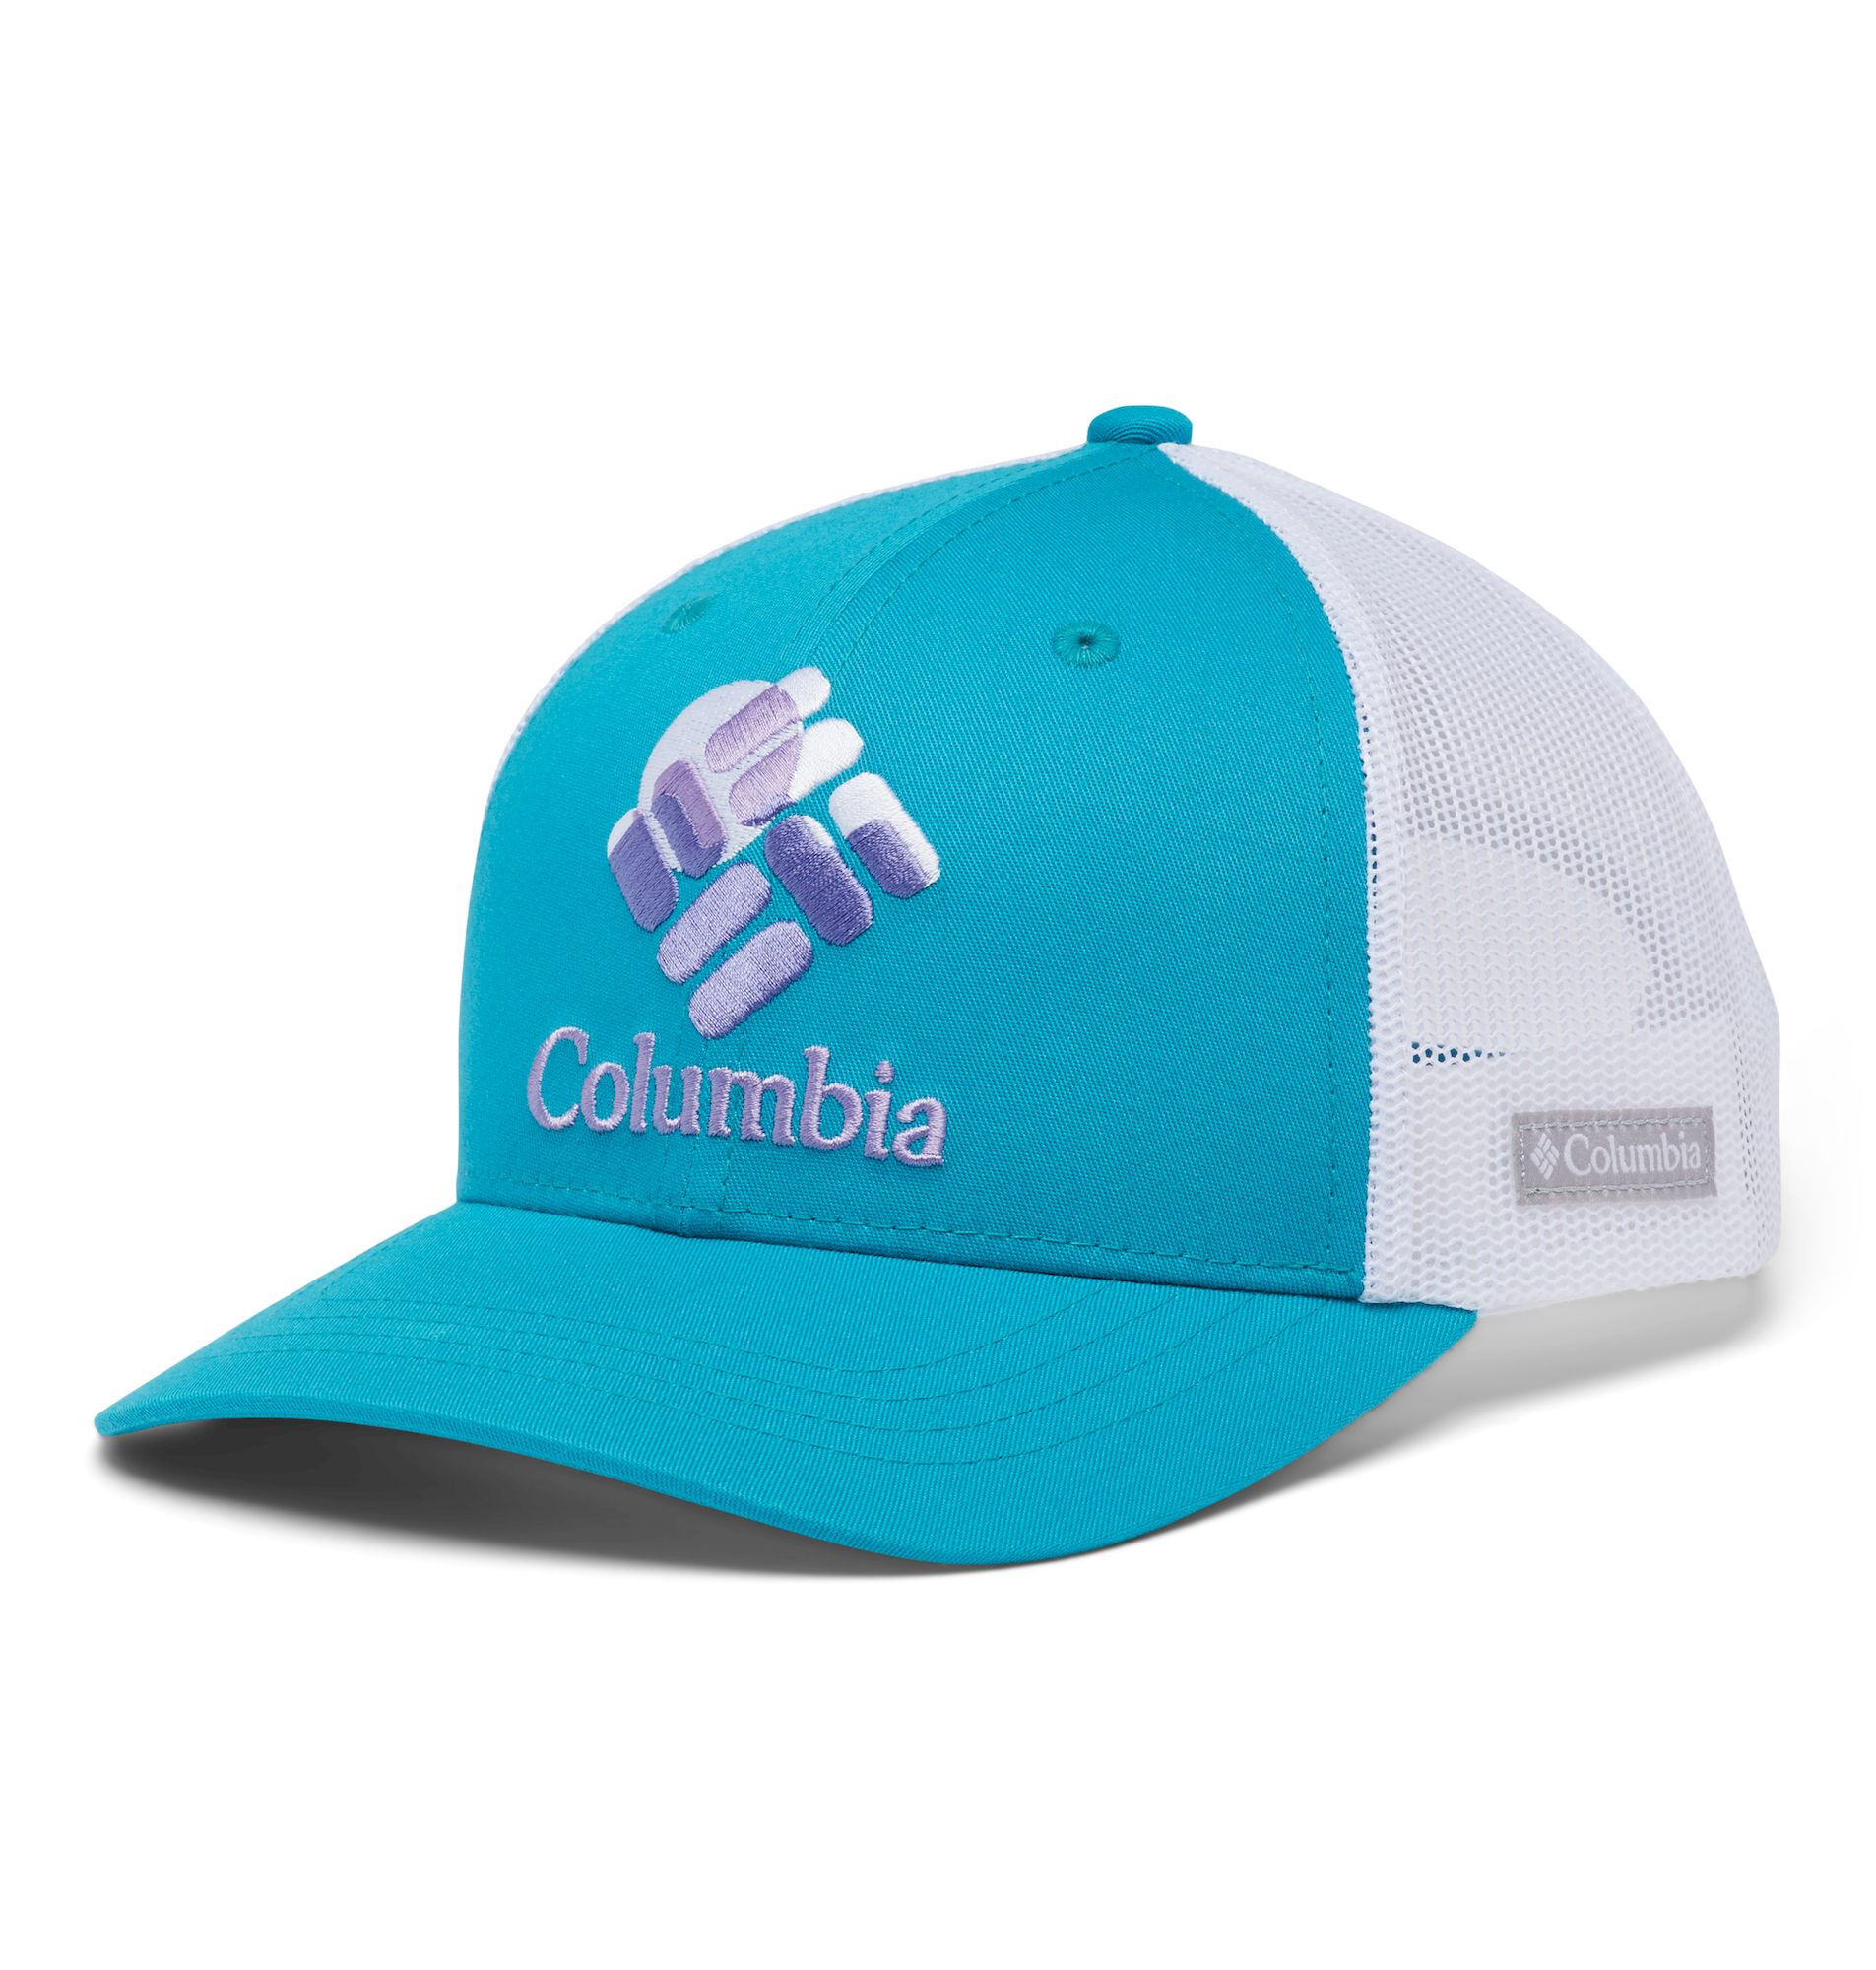 Columbia Youth Snap Back - Casquette enfant